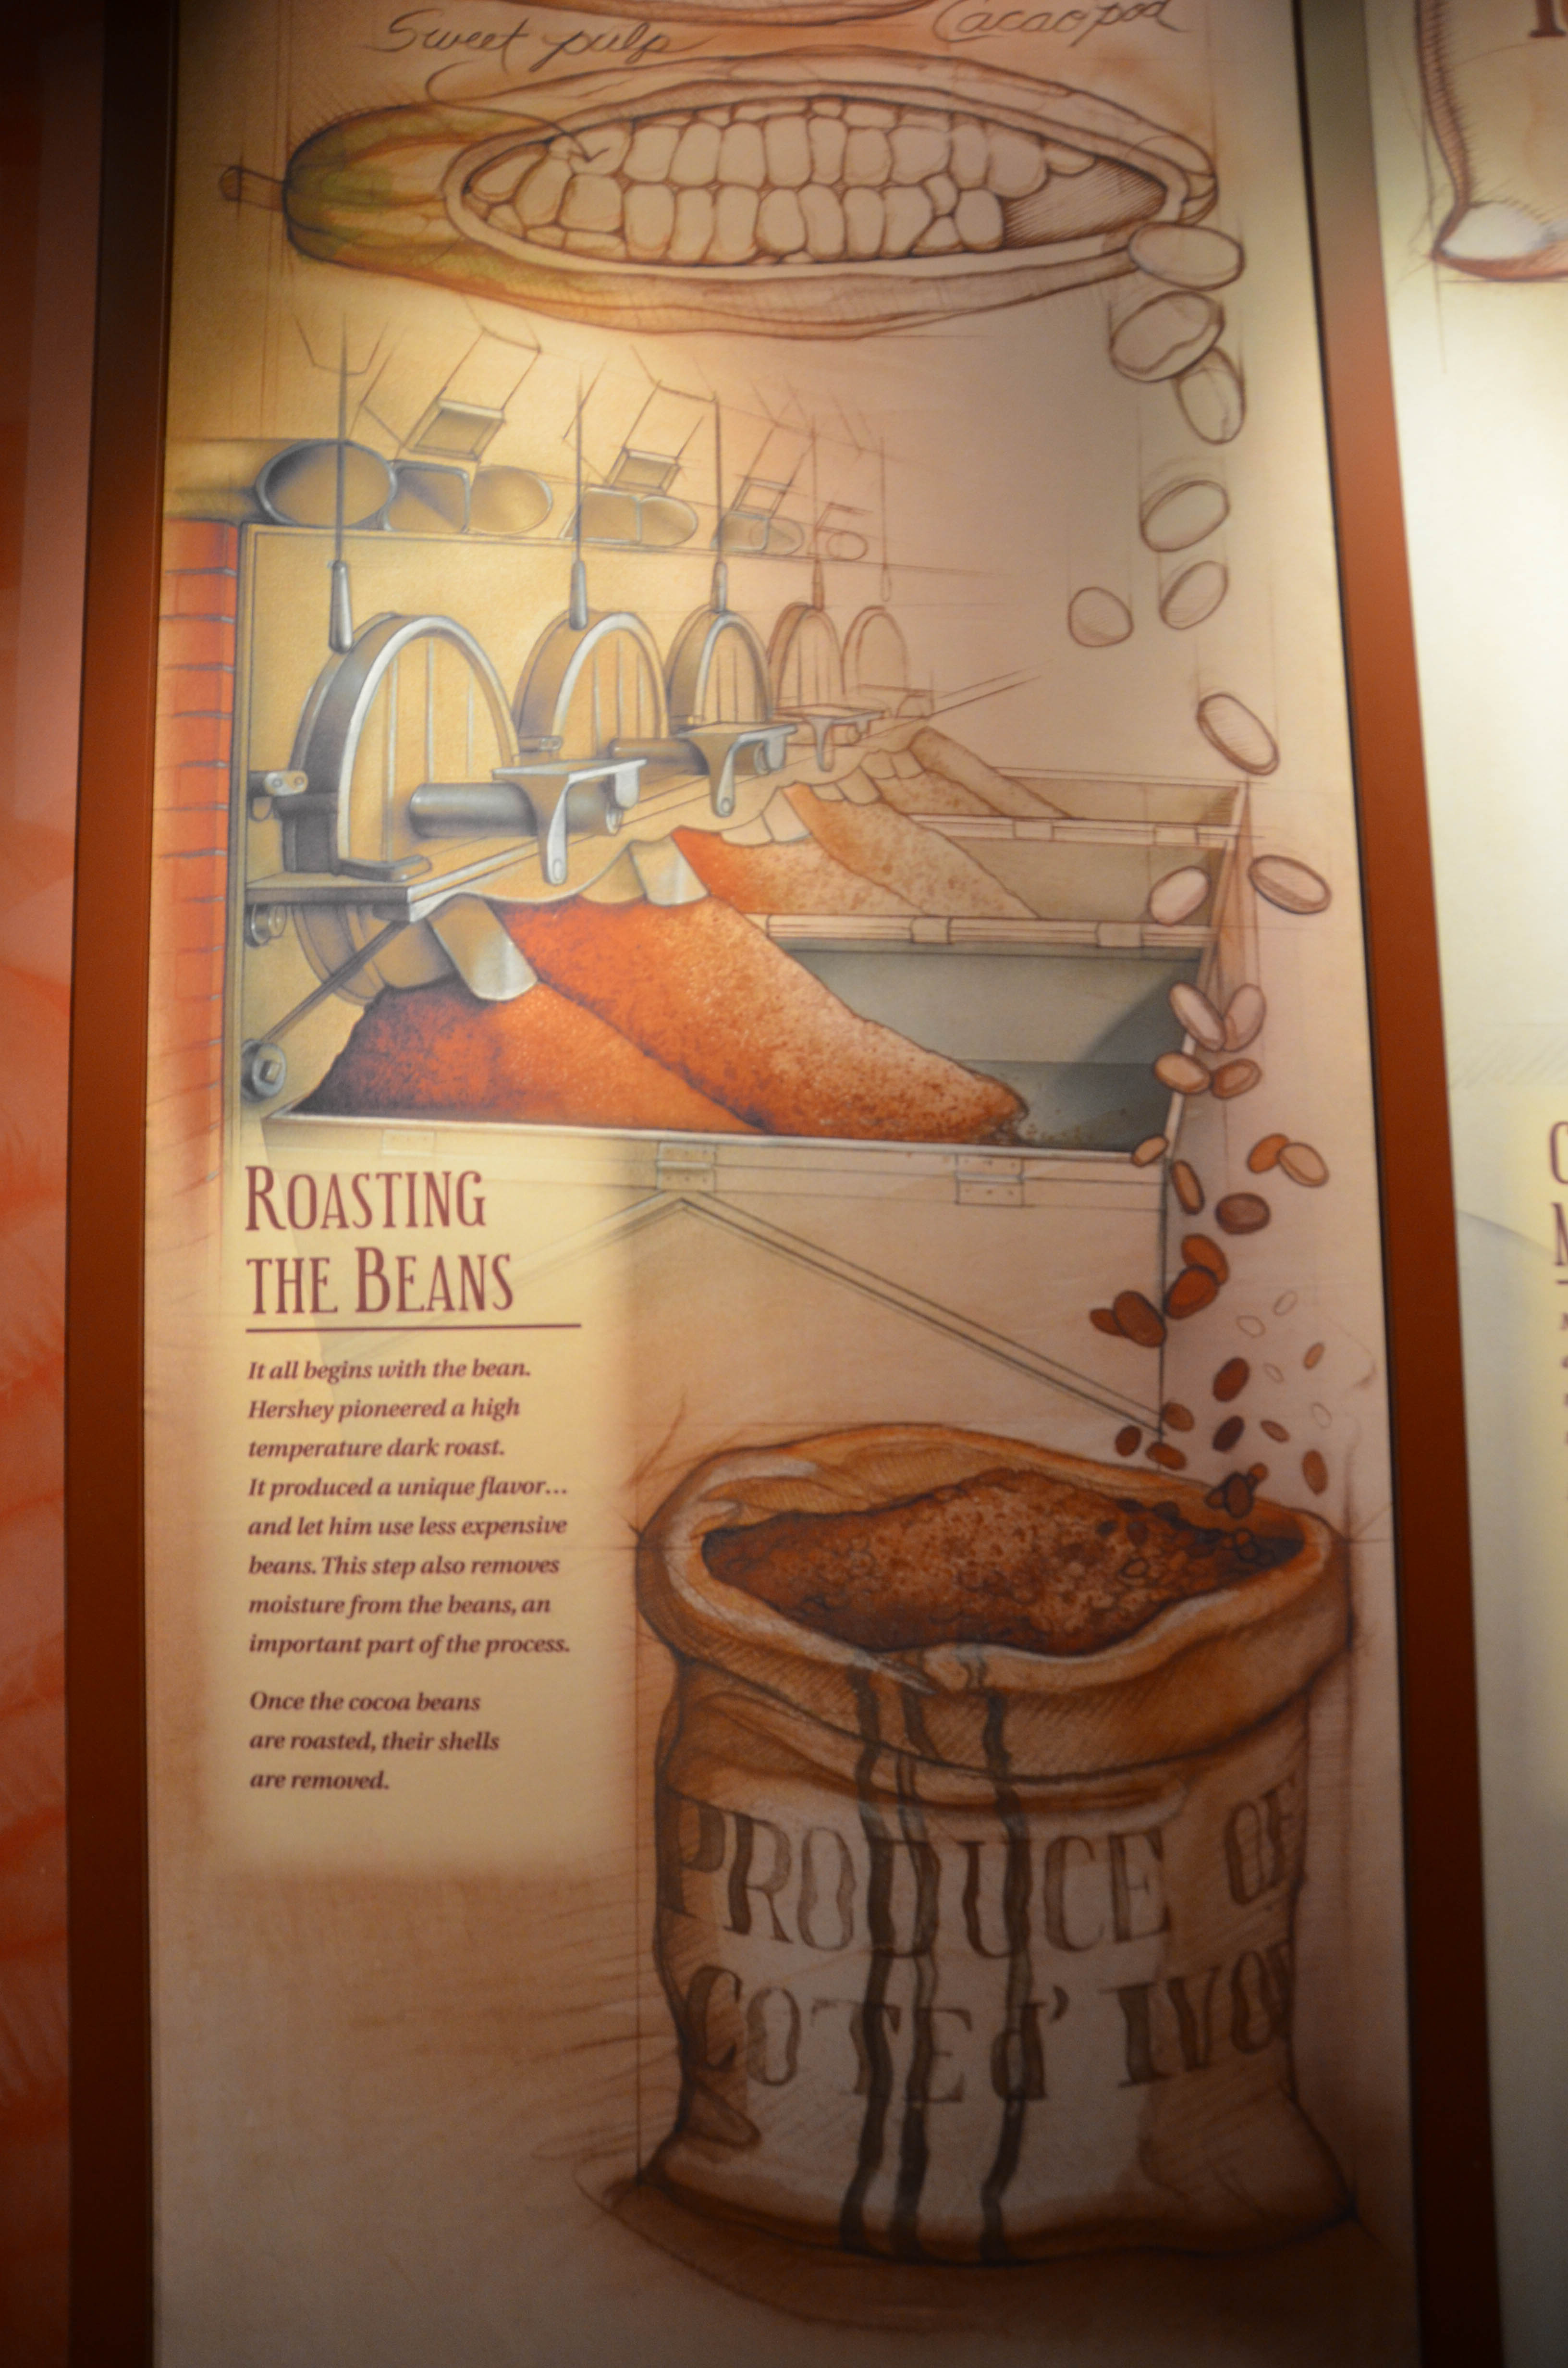 Murals demonstrated each step of the chocolate-making process.